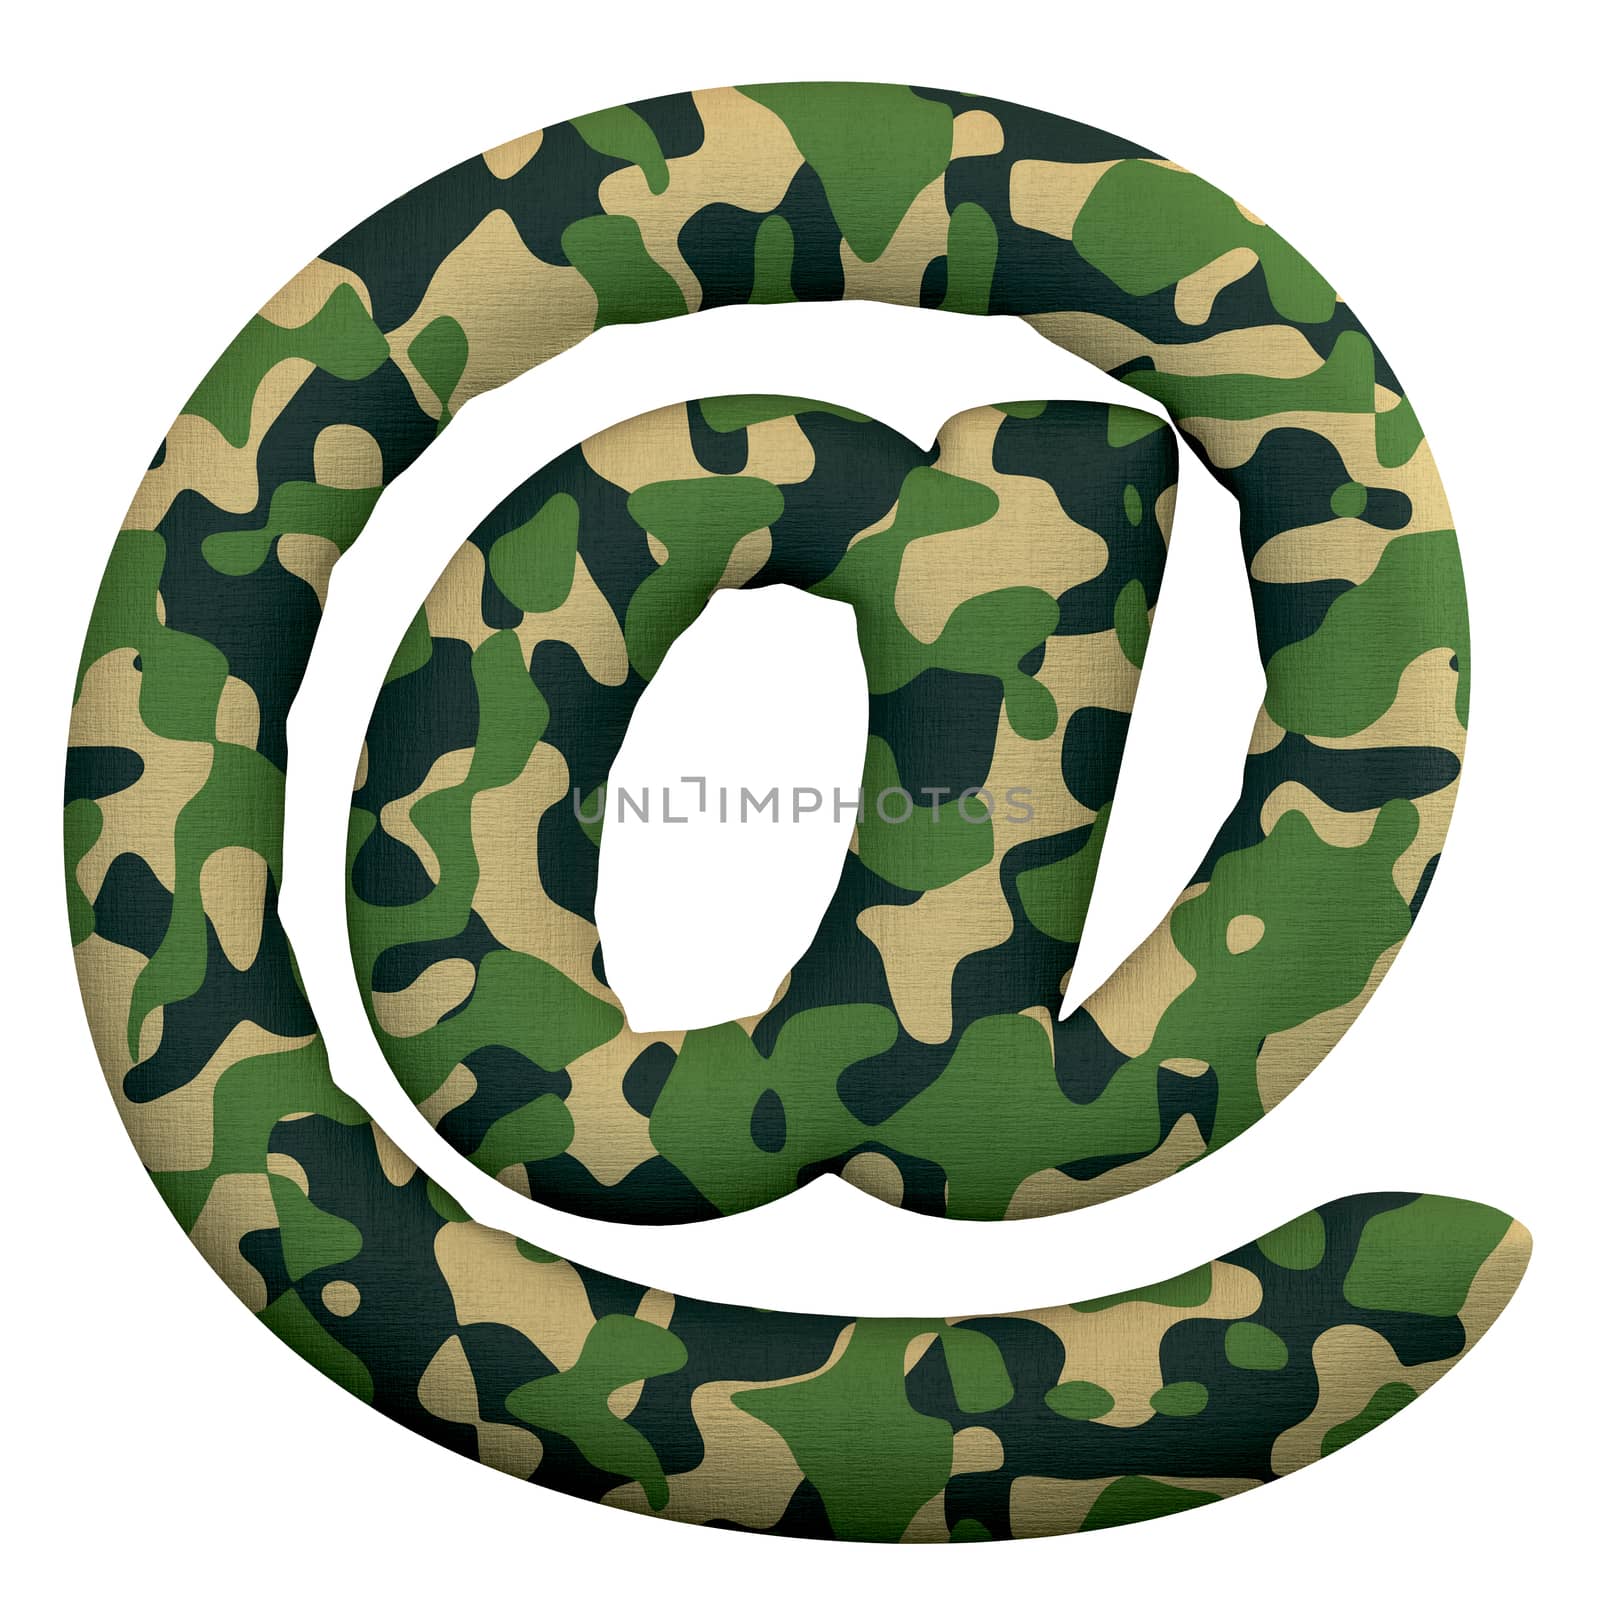 Army email sign - Arobase symbol3d Camo symbol isolated on white background. This alphabet is perfect for creative illustrations related but not limited to Army, war, survivalism...